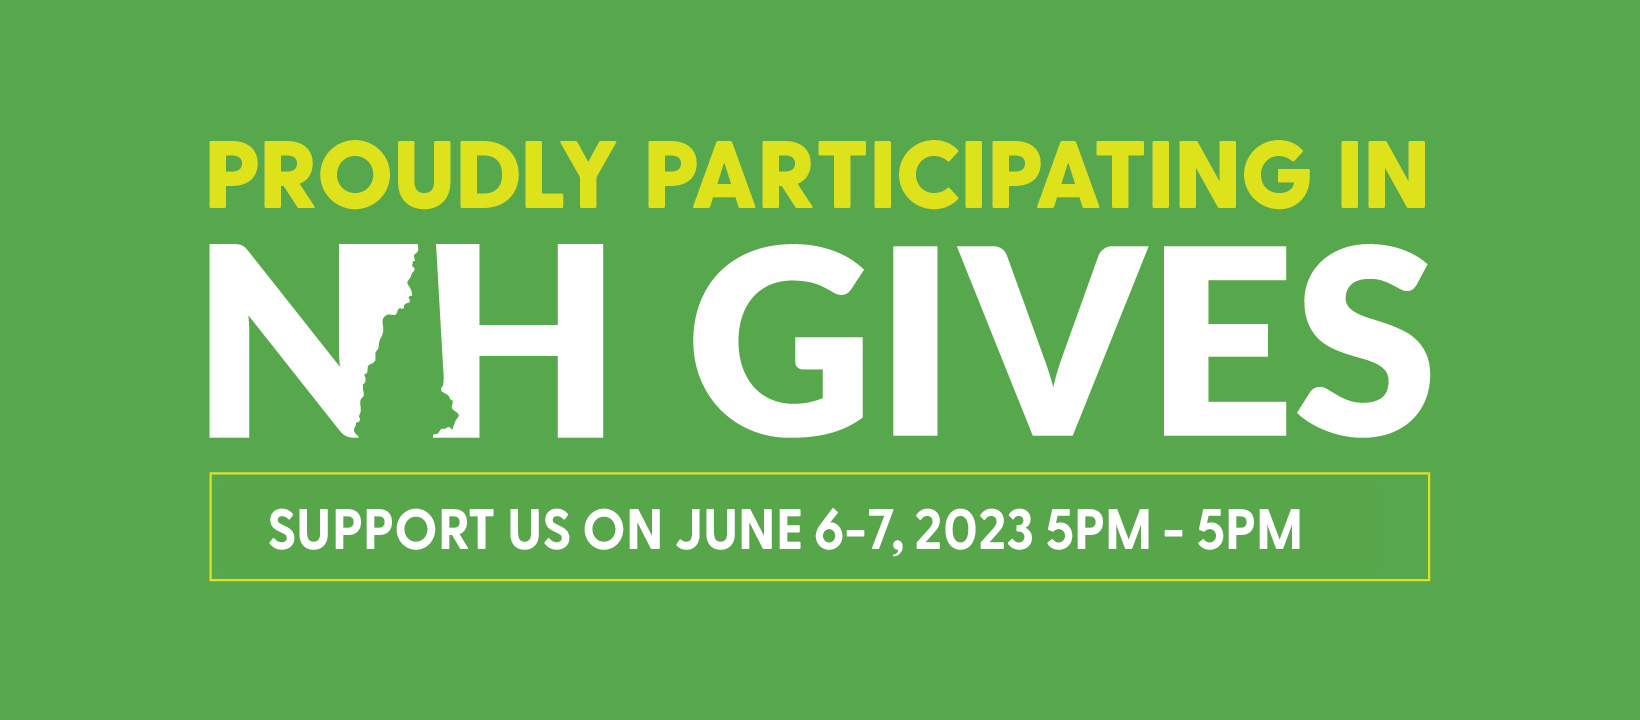 NH Gives logo with a green background and white text that says proudly participating in NH Gives, June 6-7